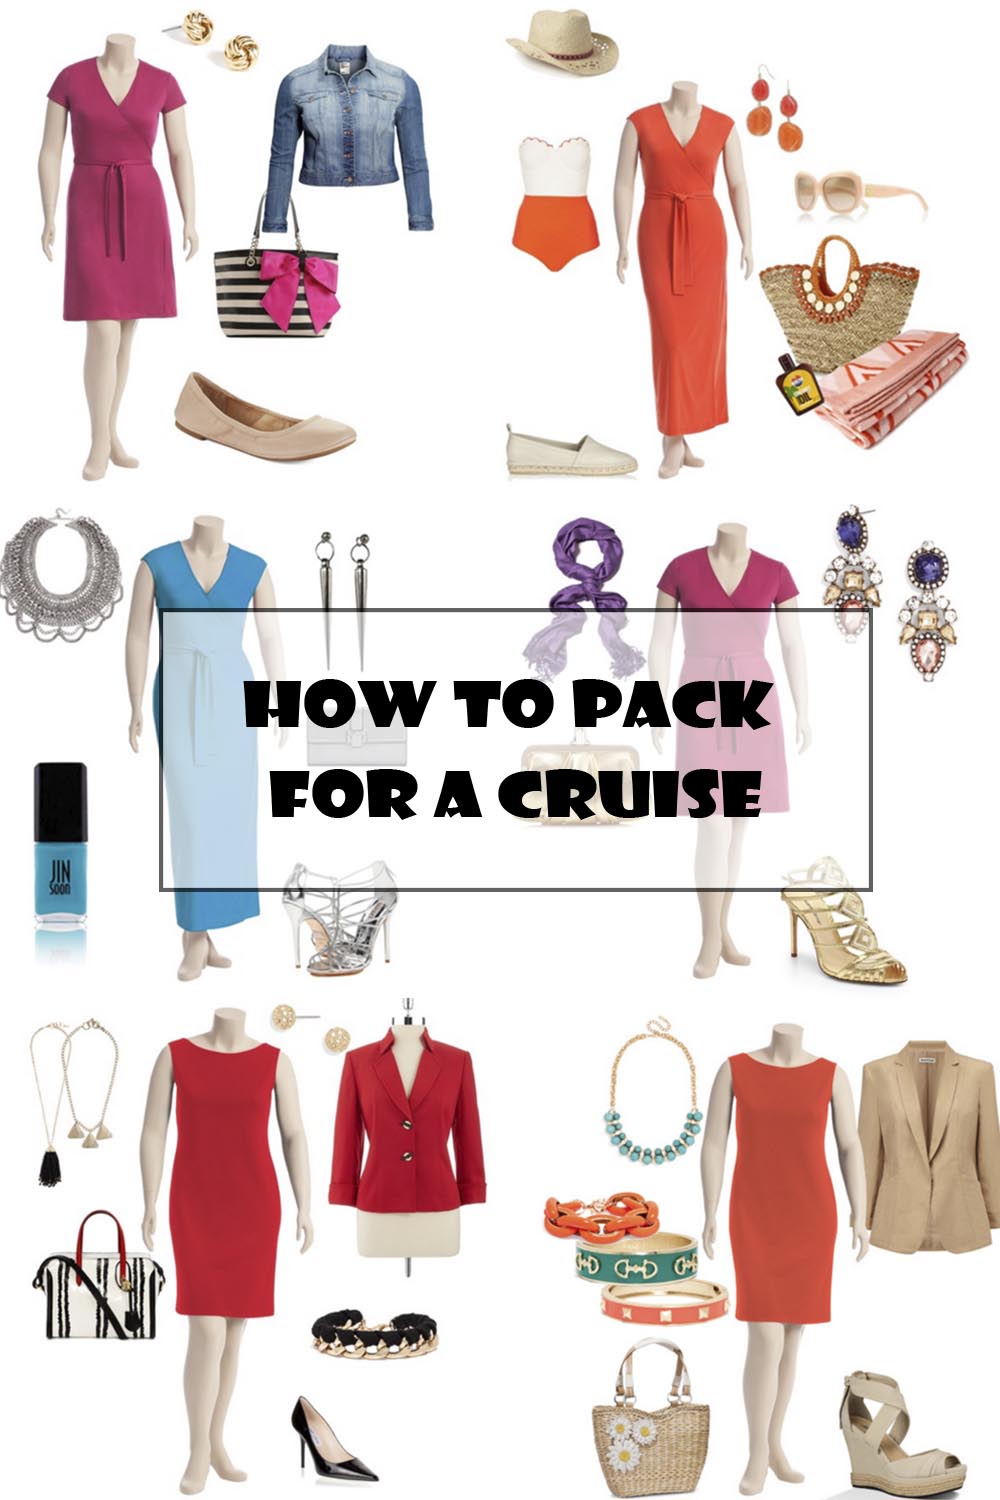 How To Pack for a Cruise